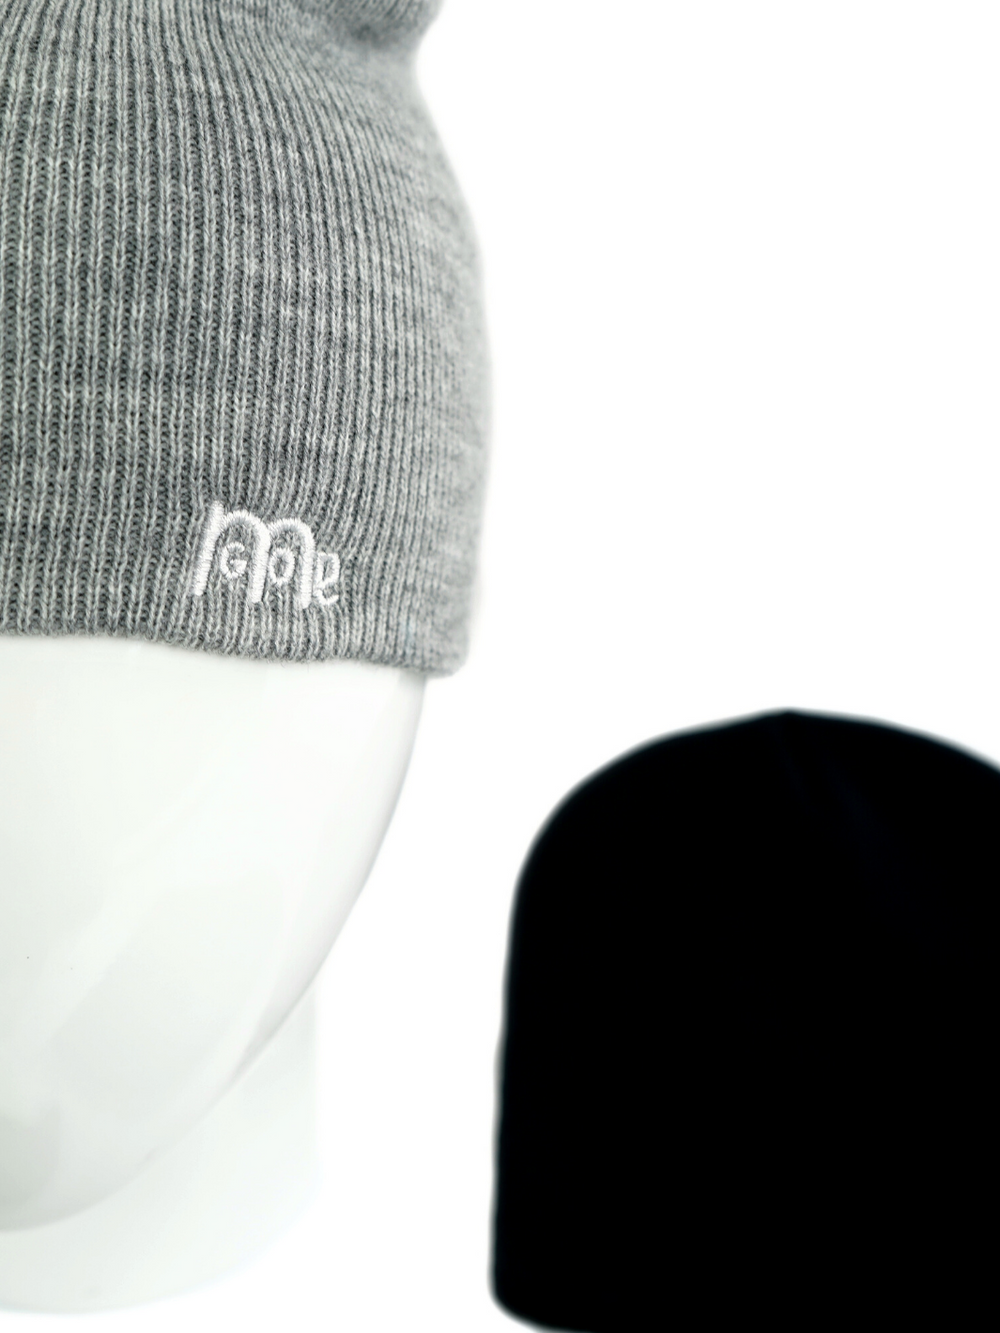 Grey Skull Cap Beenie made of 100% silky soft acrylic with White GODinme logo embroidery.